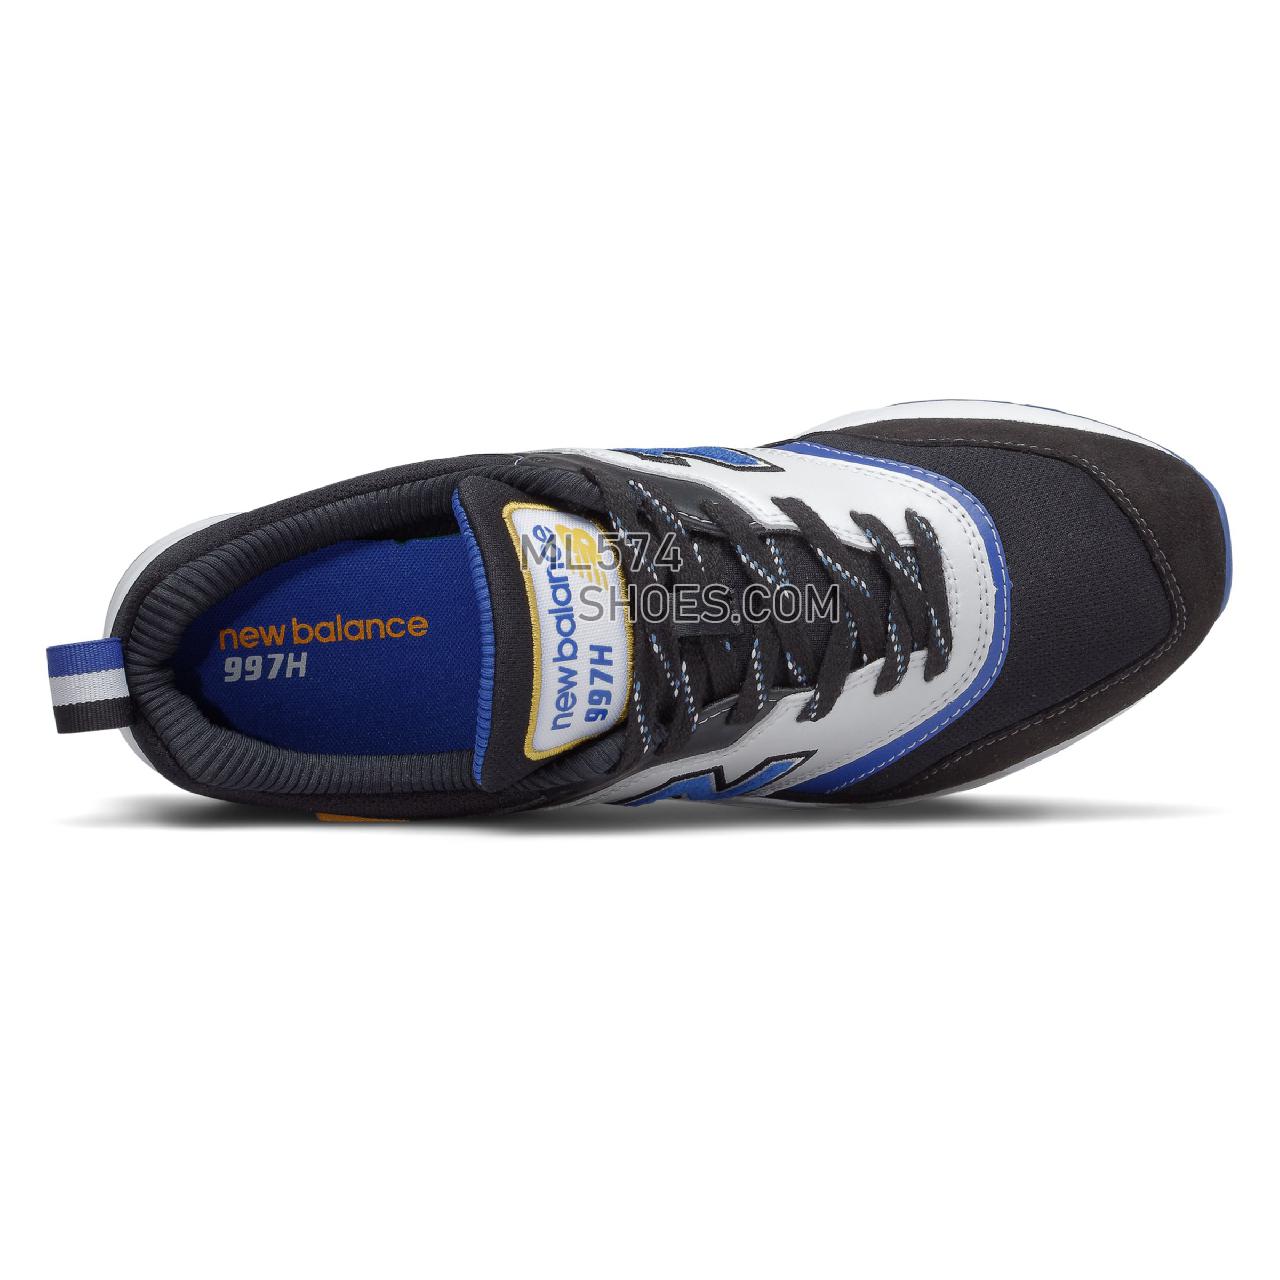 New Balance 997H - Men's Sport Style Sneakers - Black with Team Royal - CM997HEV